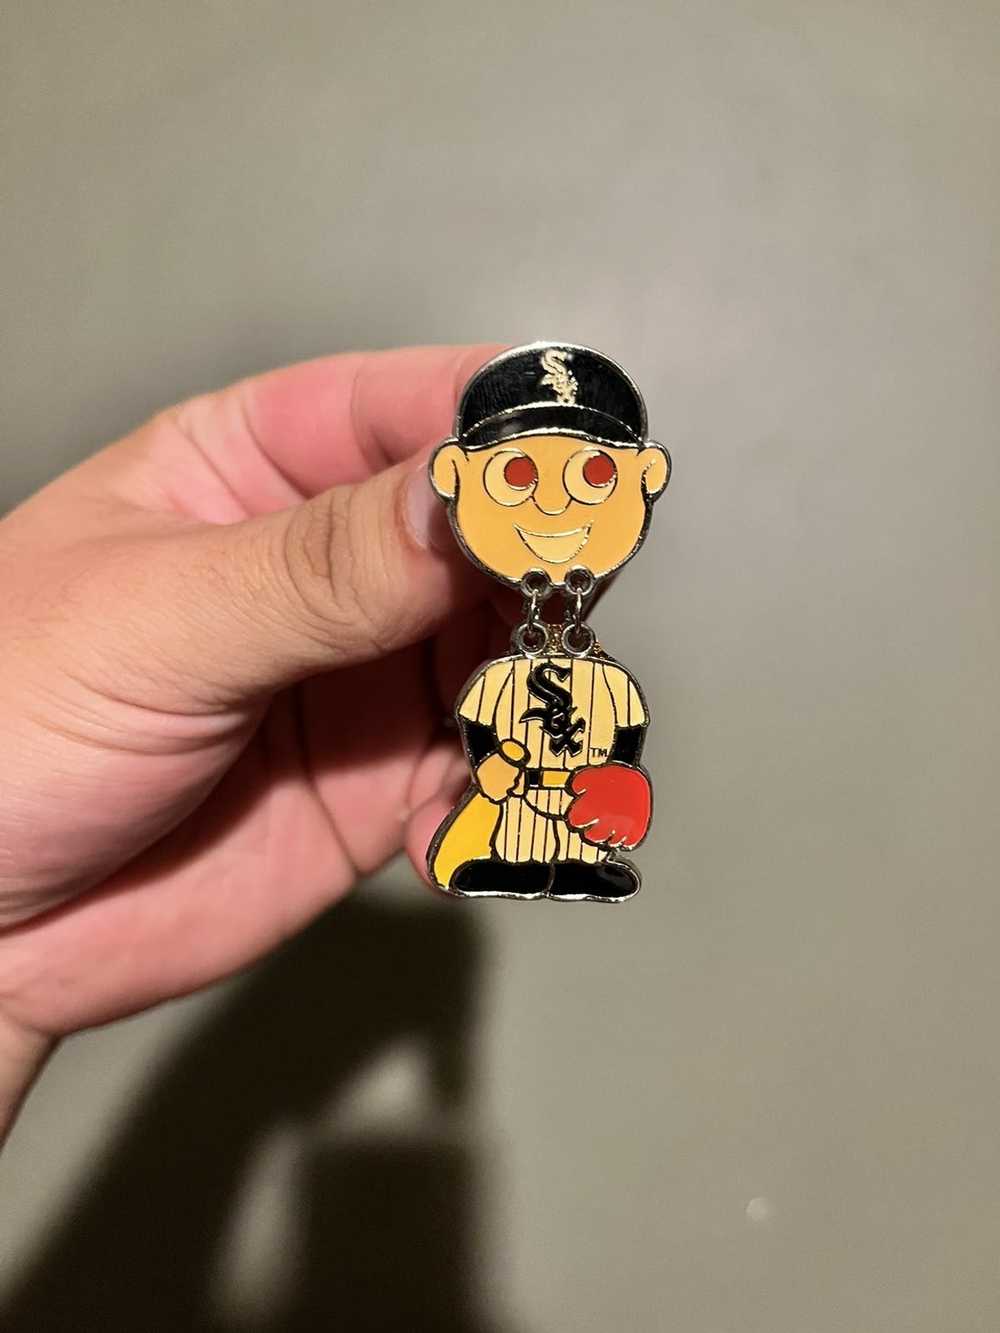 Hat Club × MLB × Pins HatClub Pin and others. - image 2